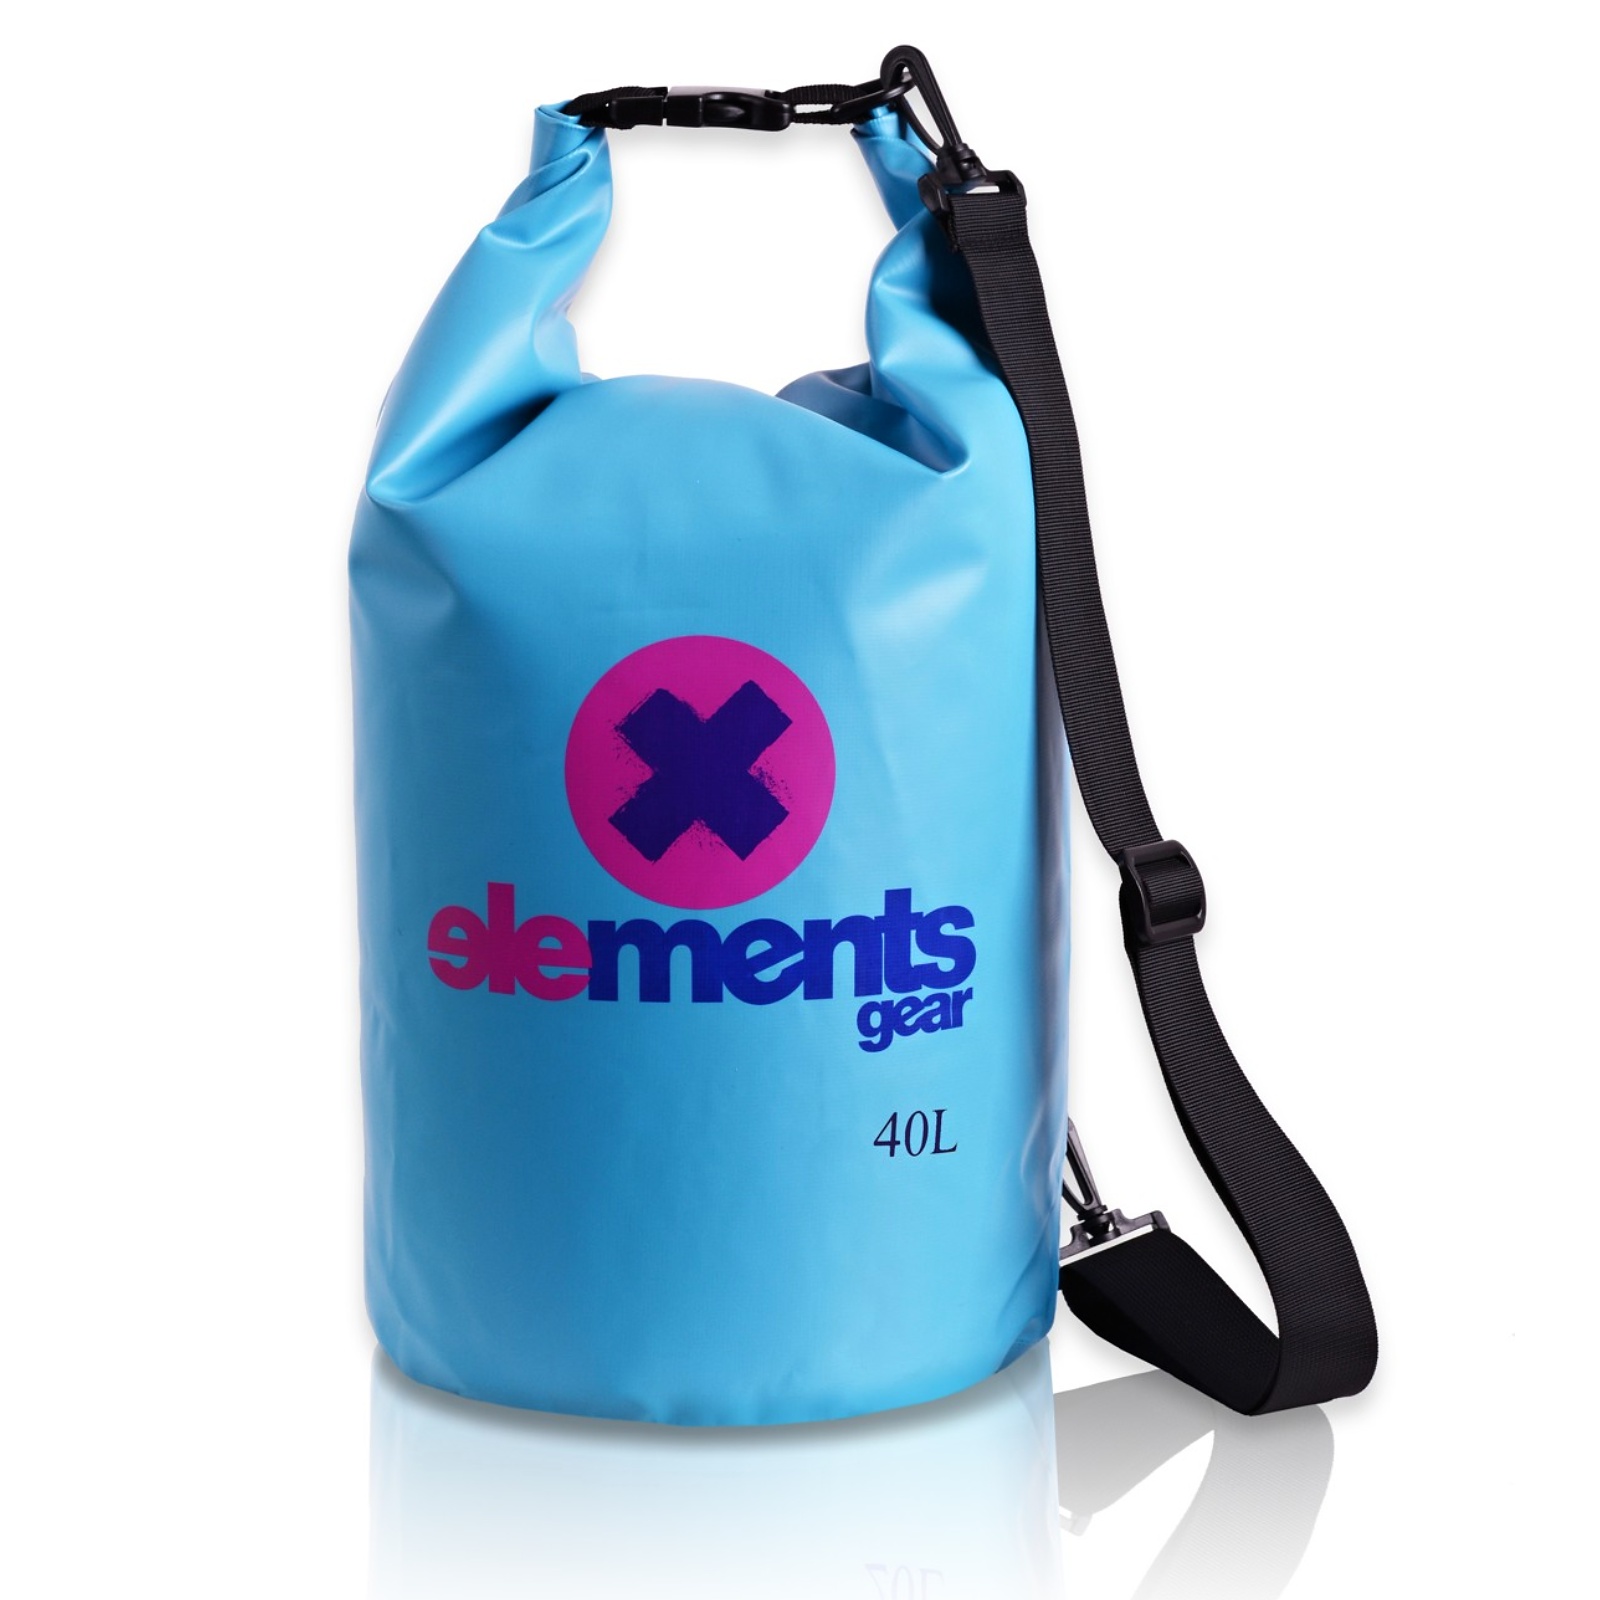 X-elements Expedition 40l